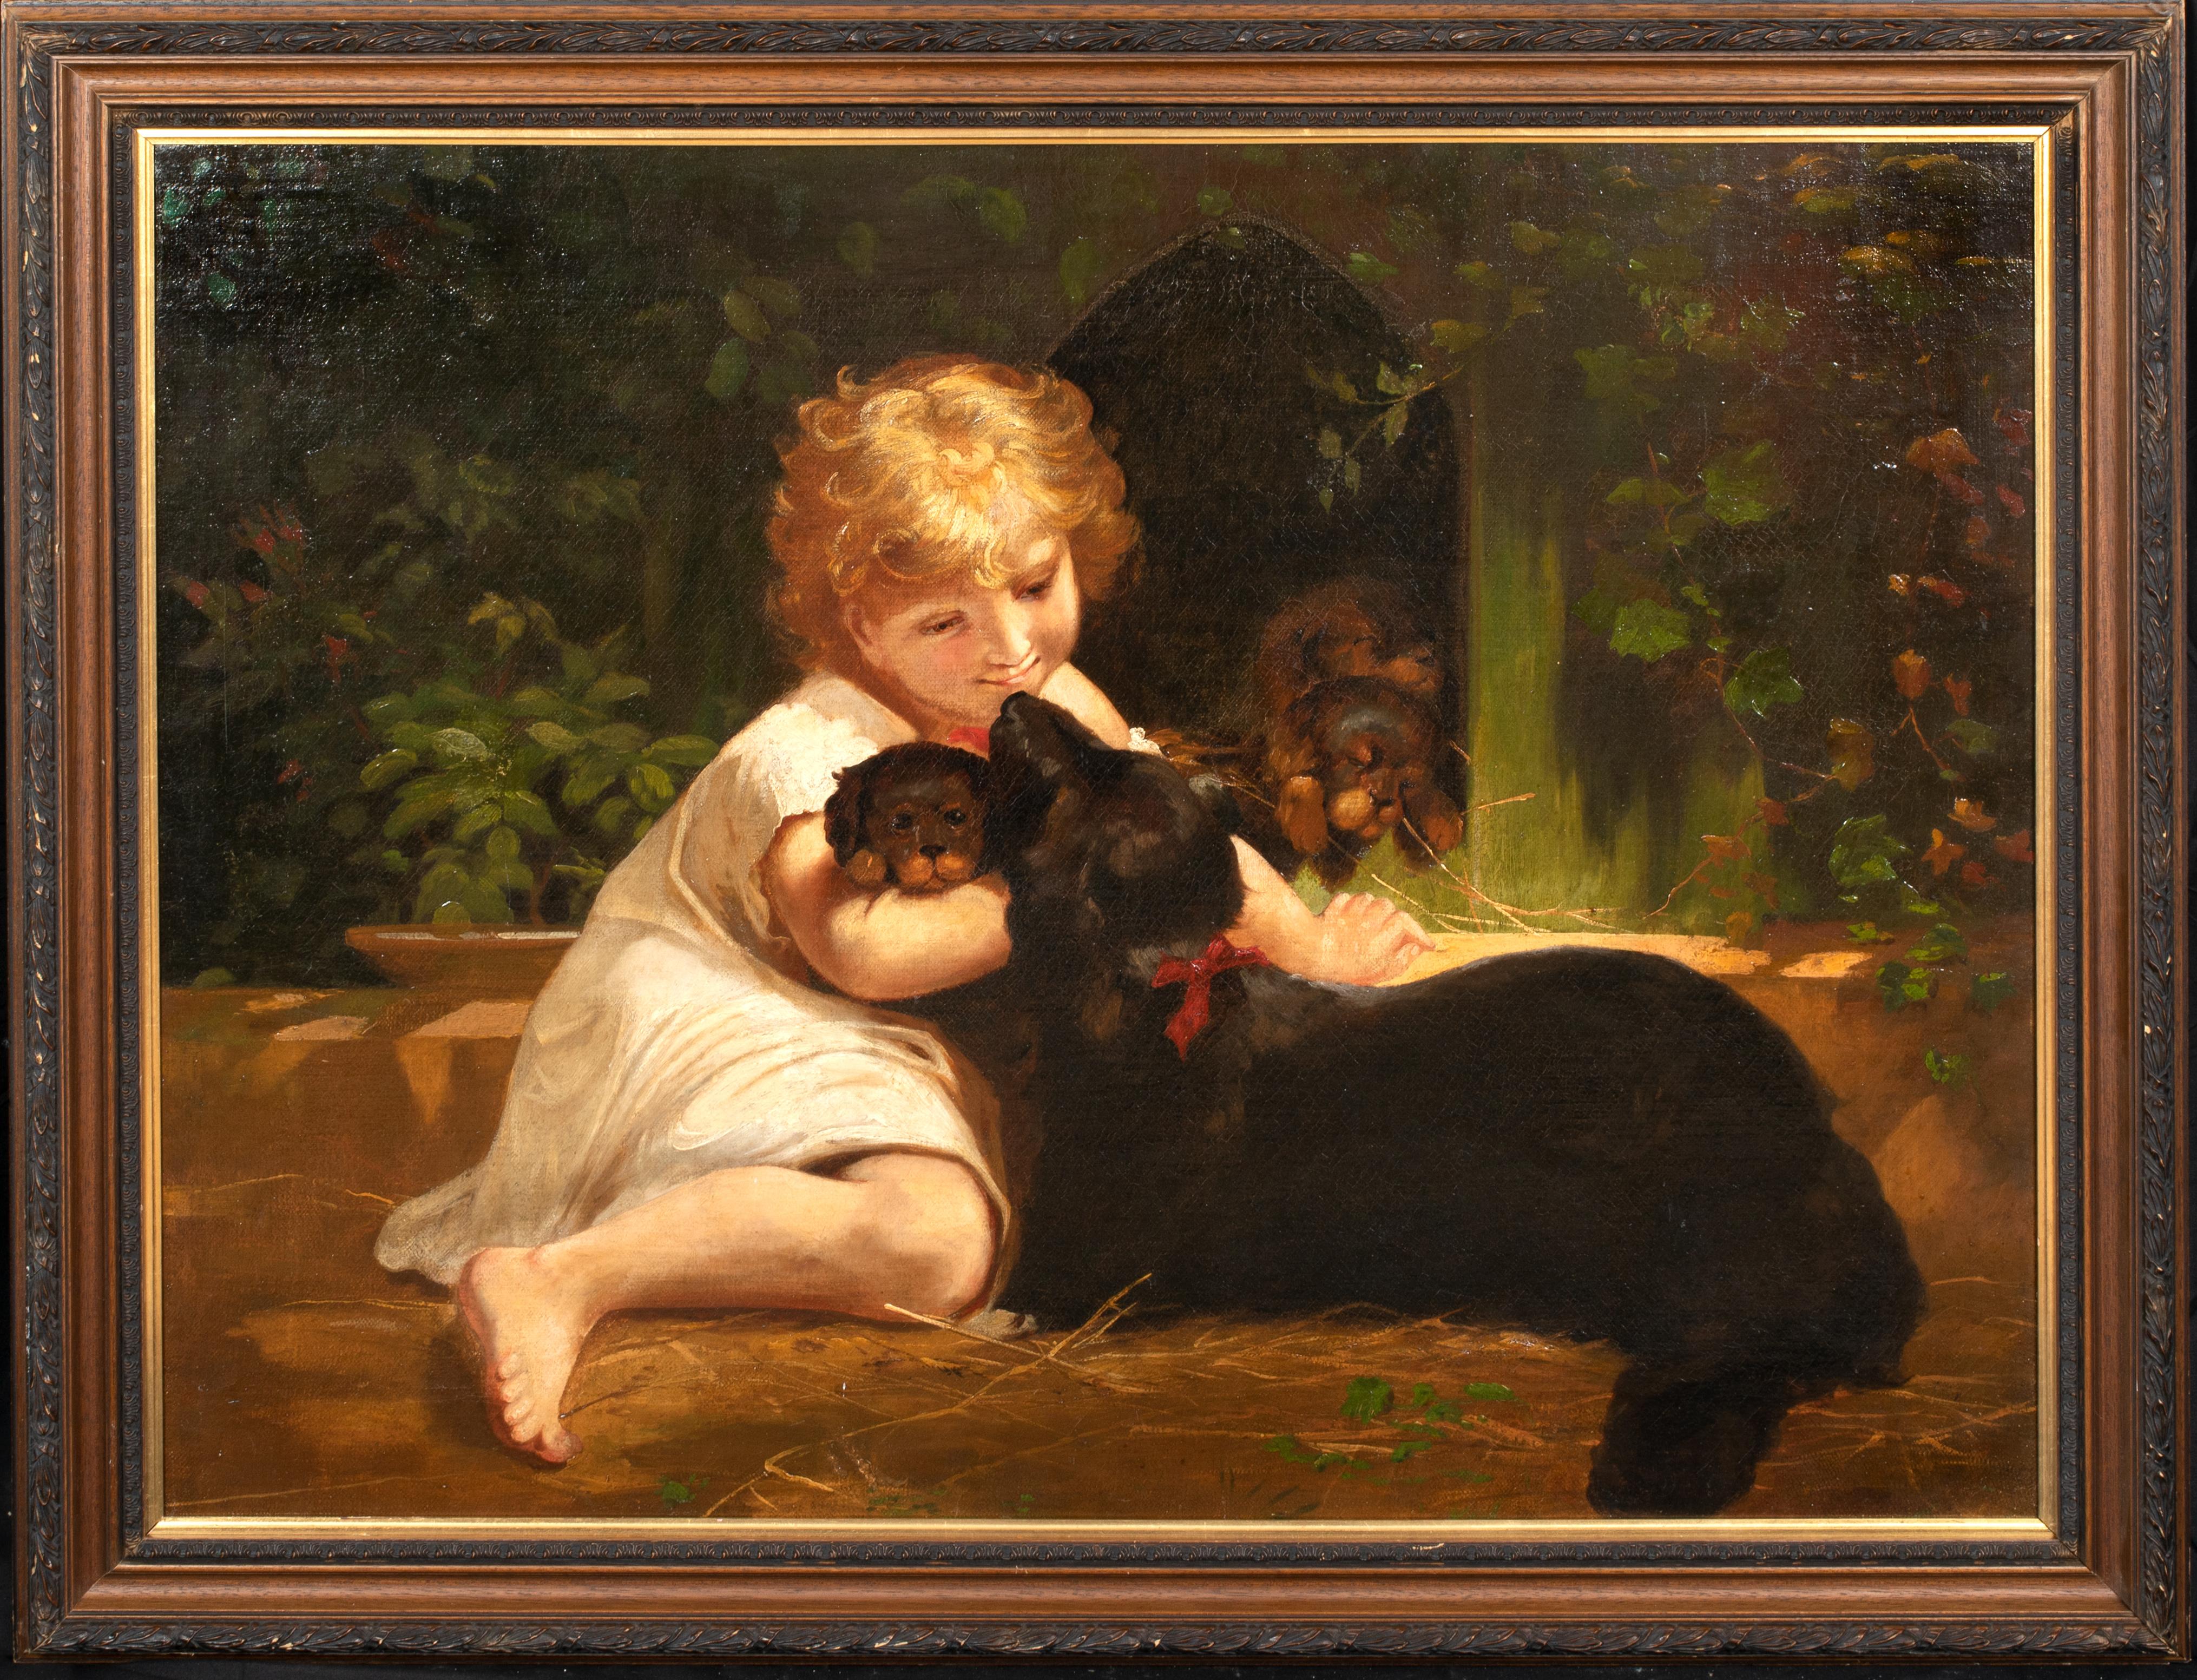 Portrait Of A Girl, Dachshund & Puppies, 19th Century - Painting by Unknown